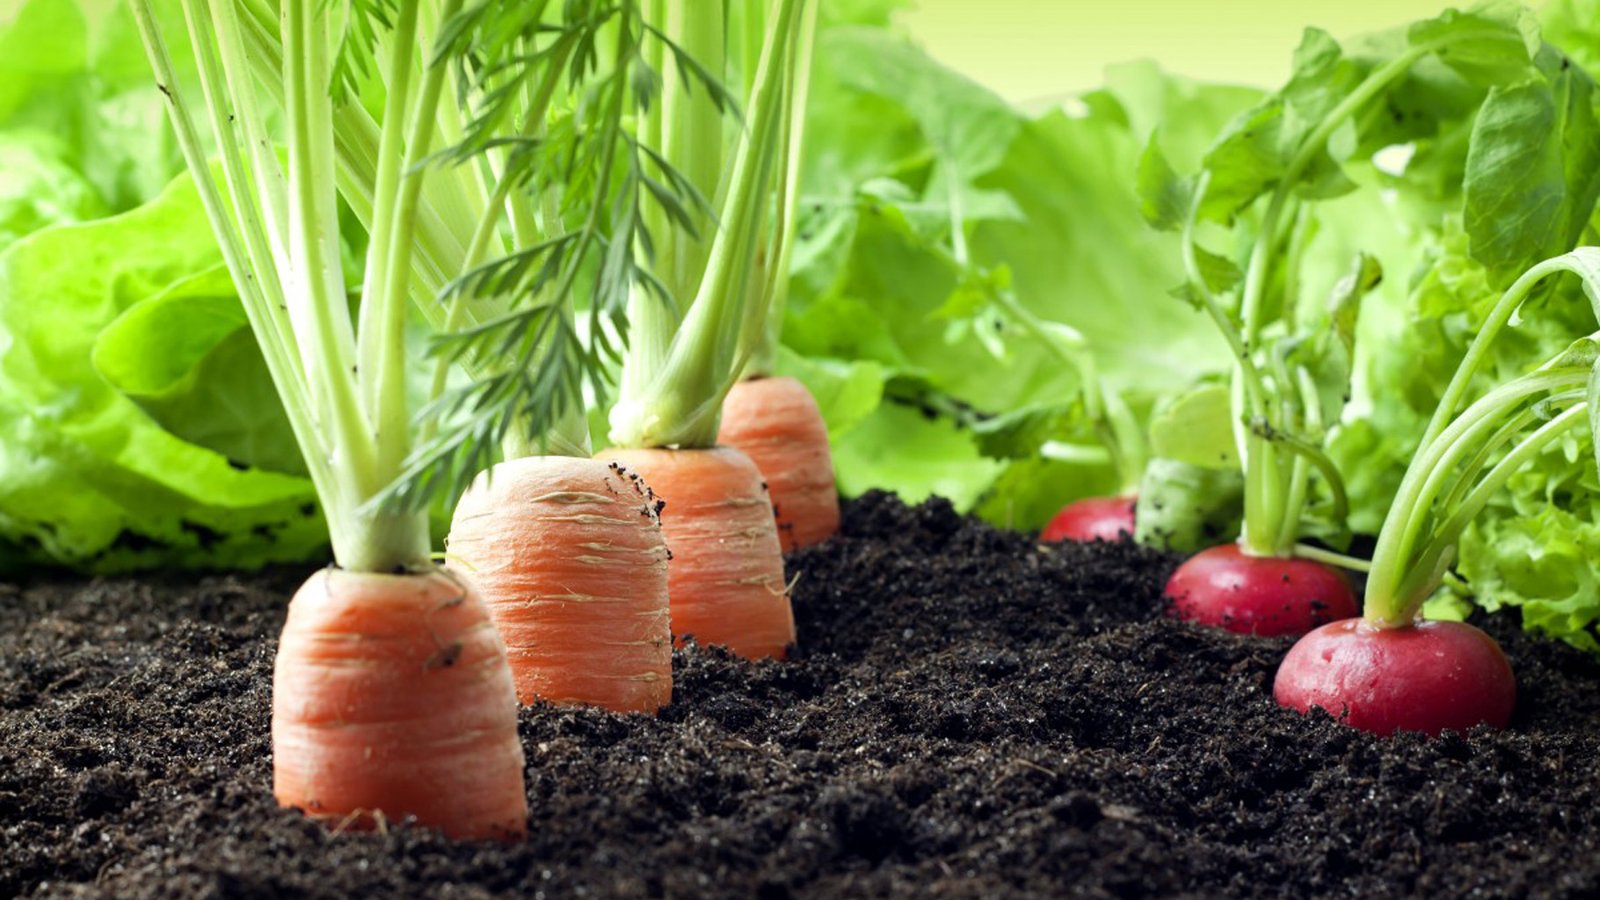 jharkhand-govt-to-develop-3000-clusters-for-organic-farming